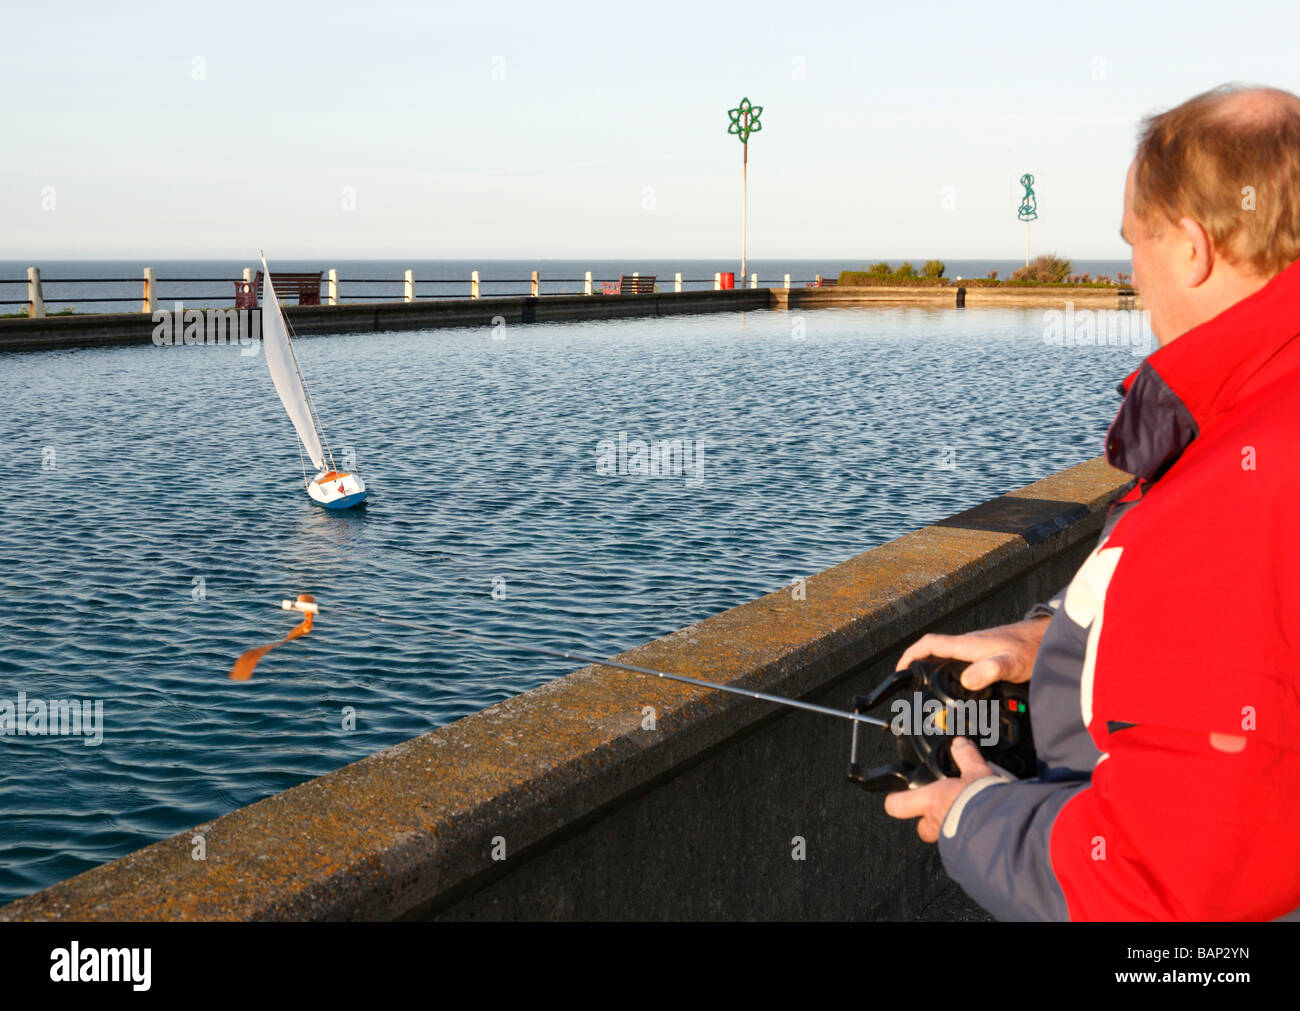 A man operating a remote controlled yacht Stock Photo